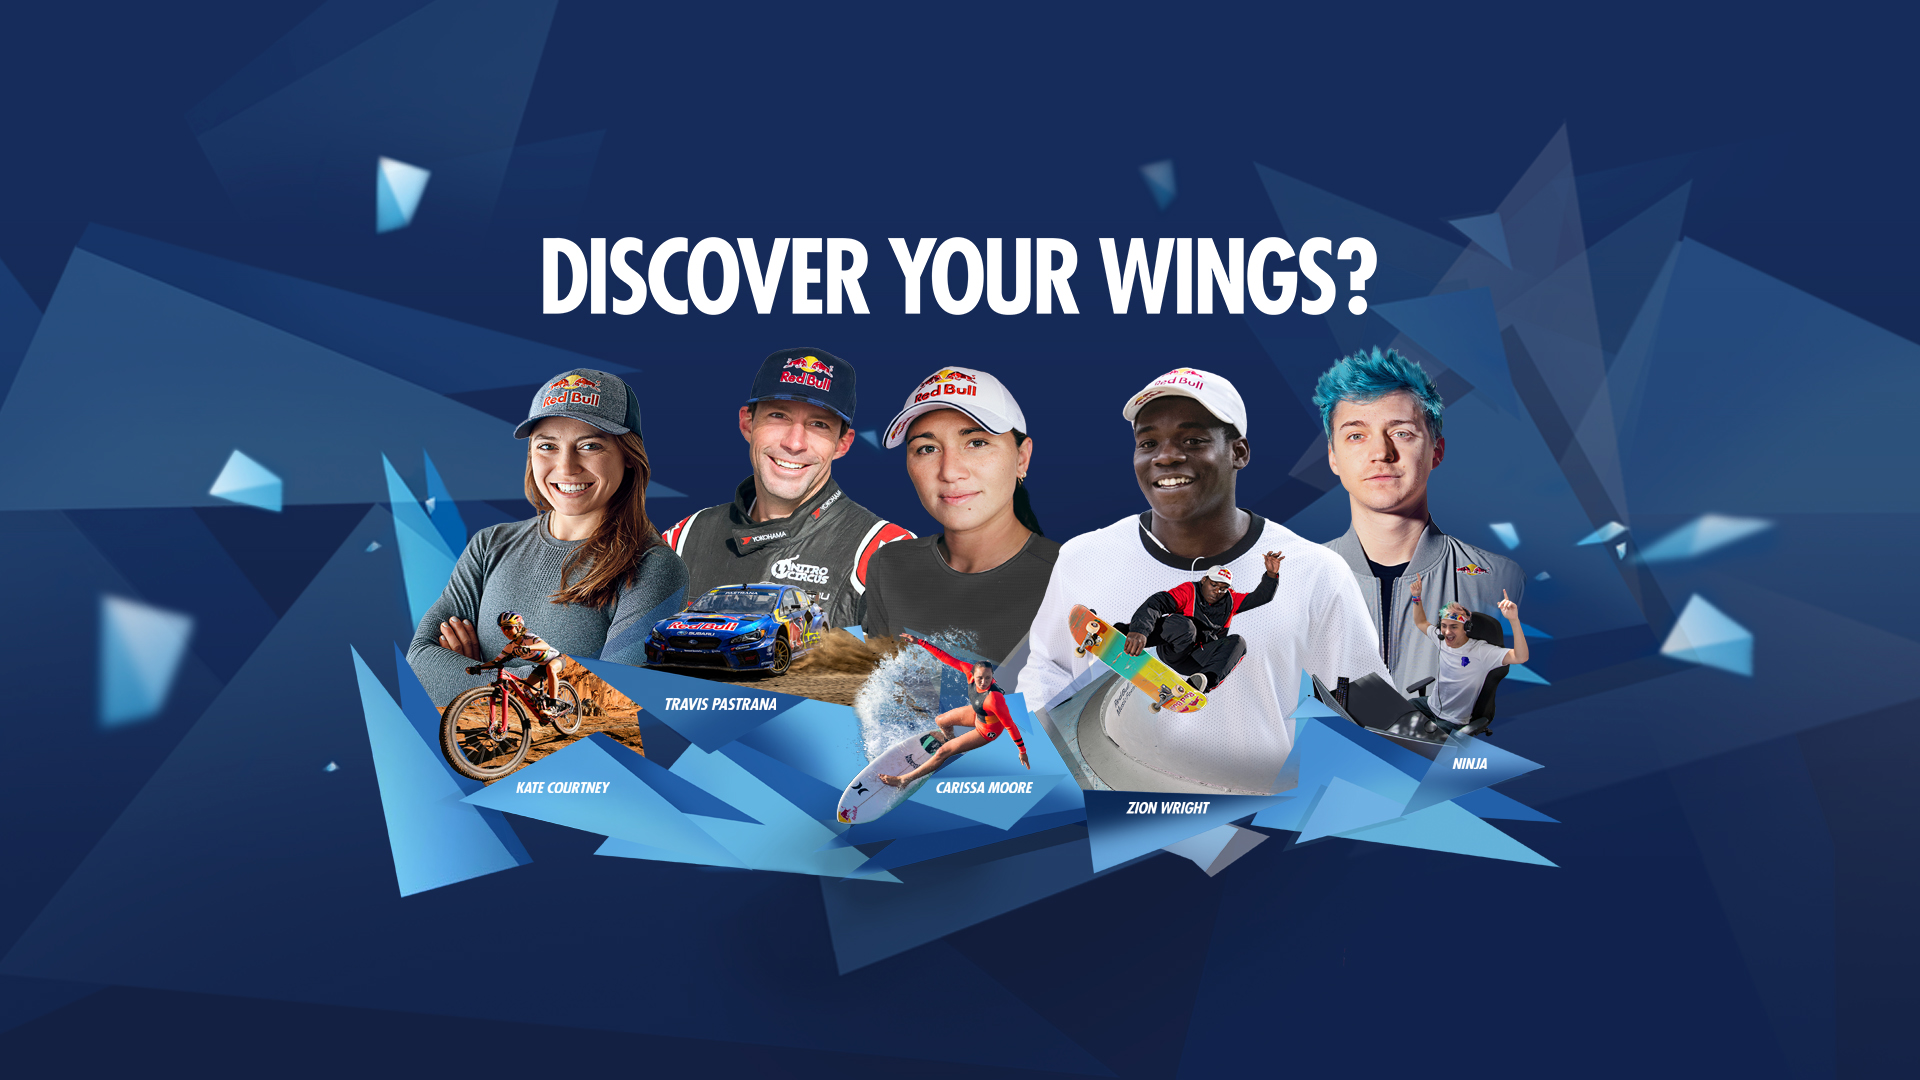 RED BULL:  DISCOVER YOUR WIIINGS! AR GAMES